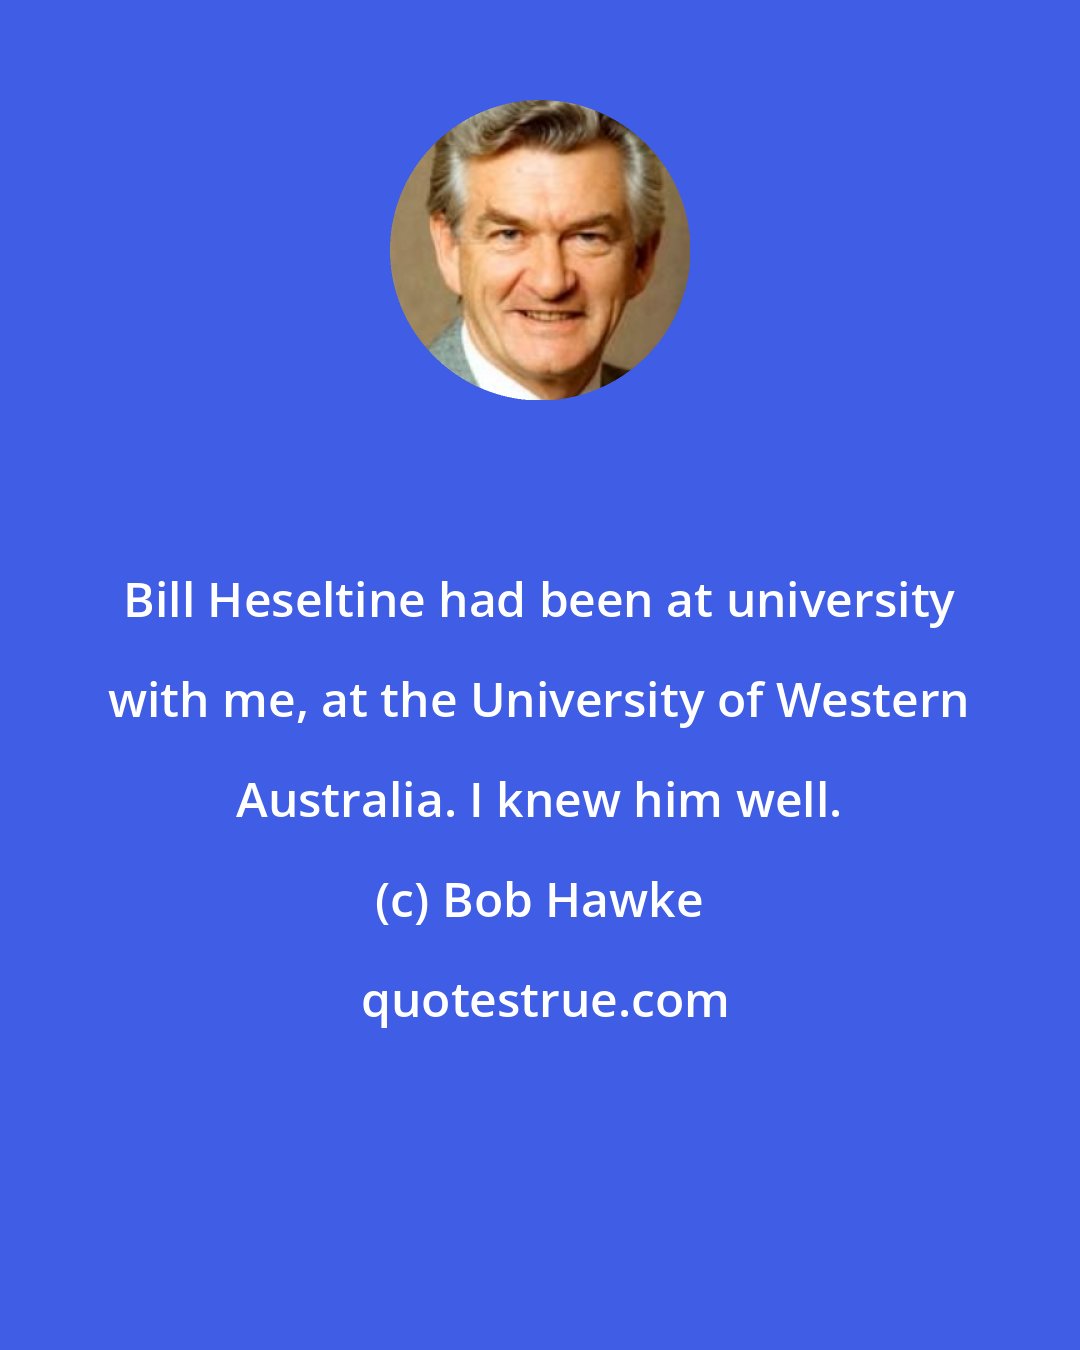 Bob Hawke: Bill Heseltine had been at university with me, at the University of Western Australia. I knew him well.